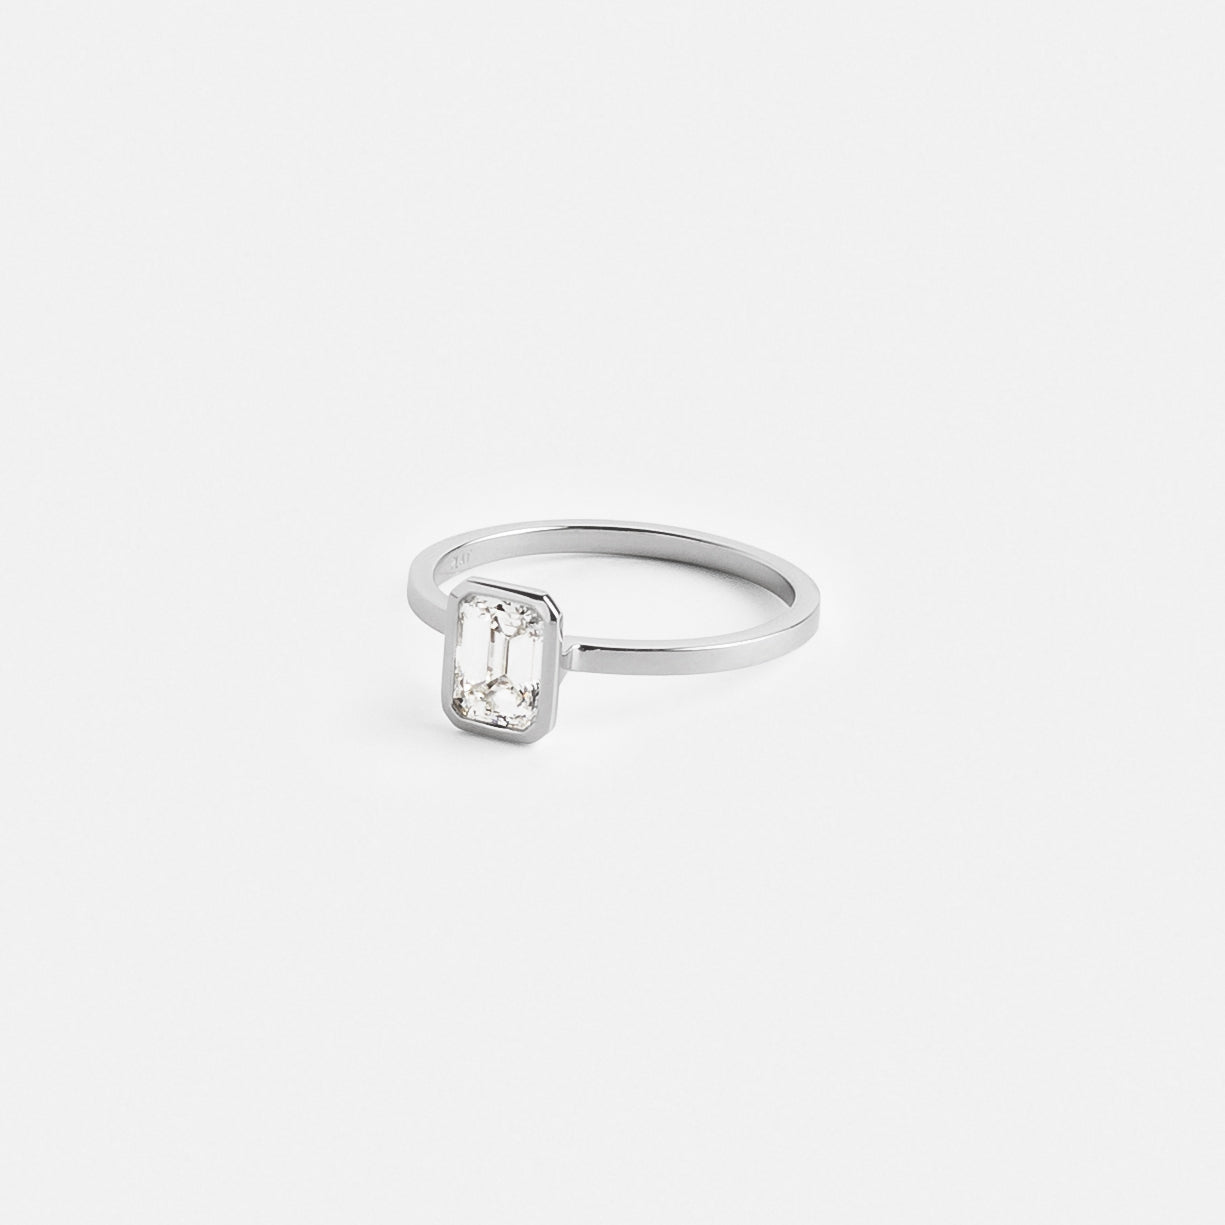 Auda Stacked Ring in Platinum set with a 0.82ct emerald cut natural diamond By SHW Fine Jewelry NYC